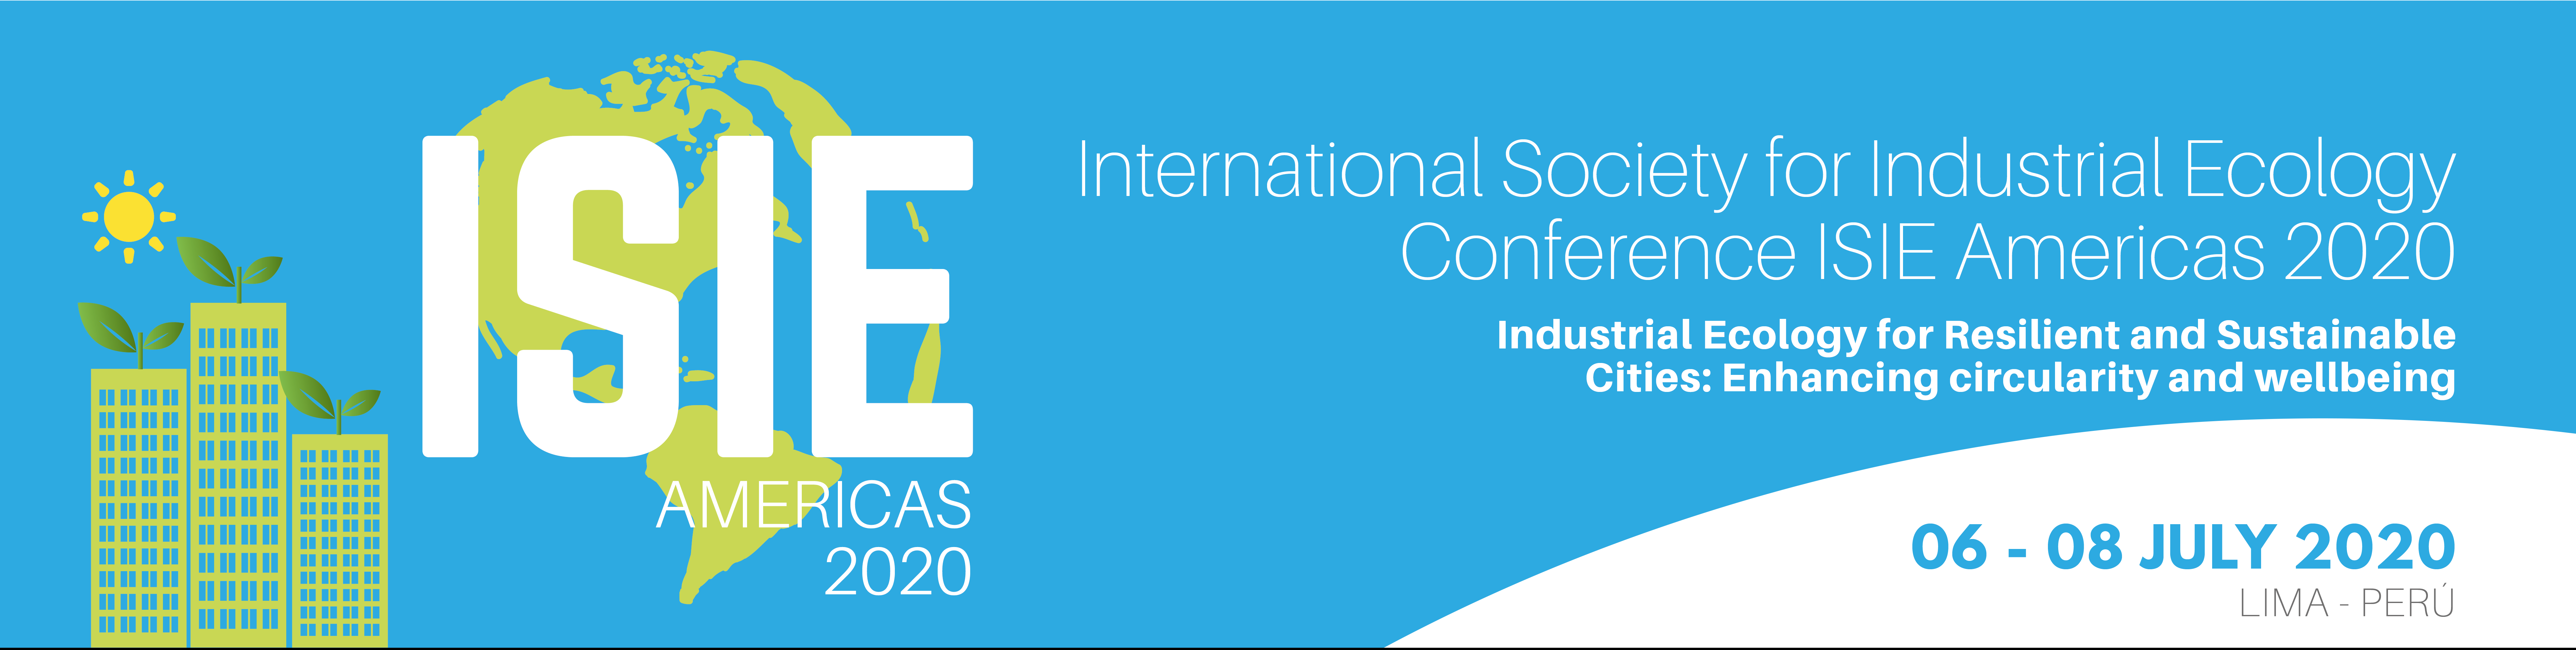 ISIE 2020 International Society for Industrial Ecology Conference